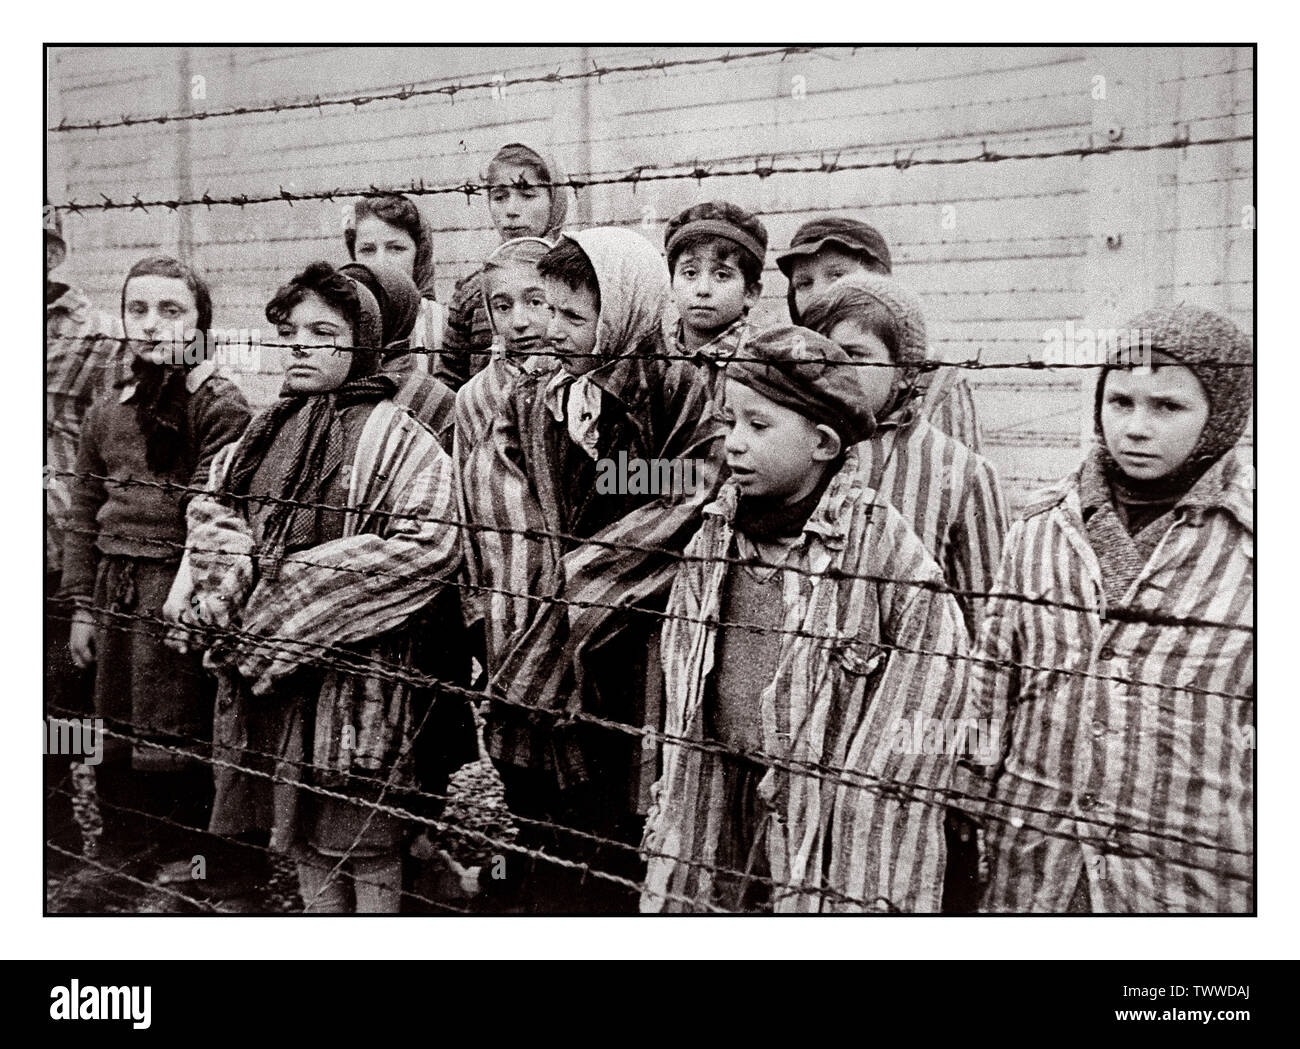 AUSCHWITZ 1945 CHILDREN PRISONERS LIBERATION Child prisoners wearing striped uniforms stare out to their liberators from behind a barbed wire fence in notorious WW2 Nazi death-camp Auschwitz  Southern Poland. World War II Second World War Stock Photo